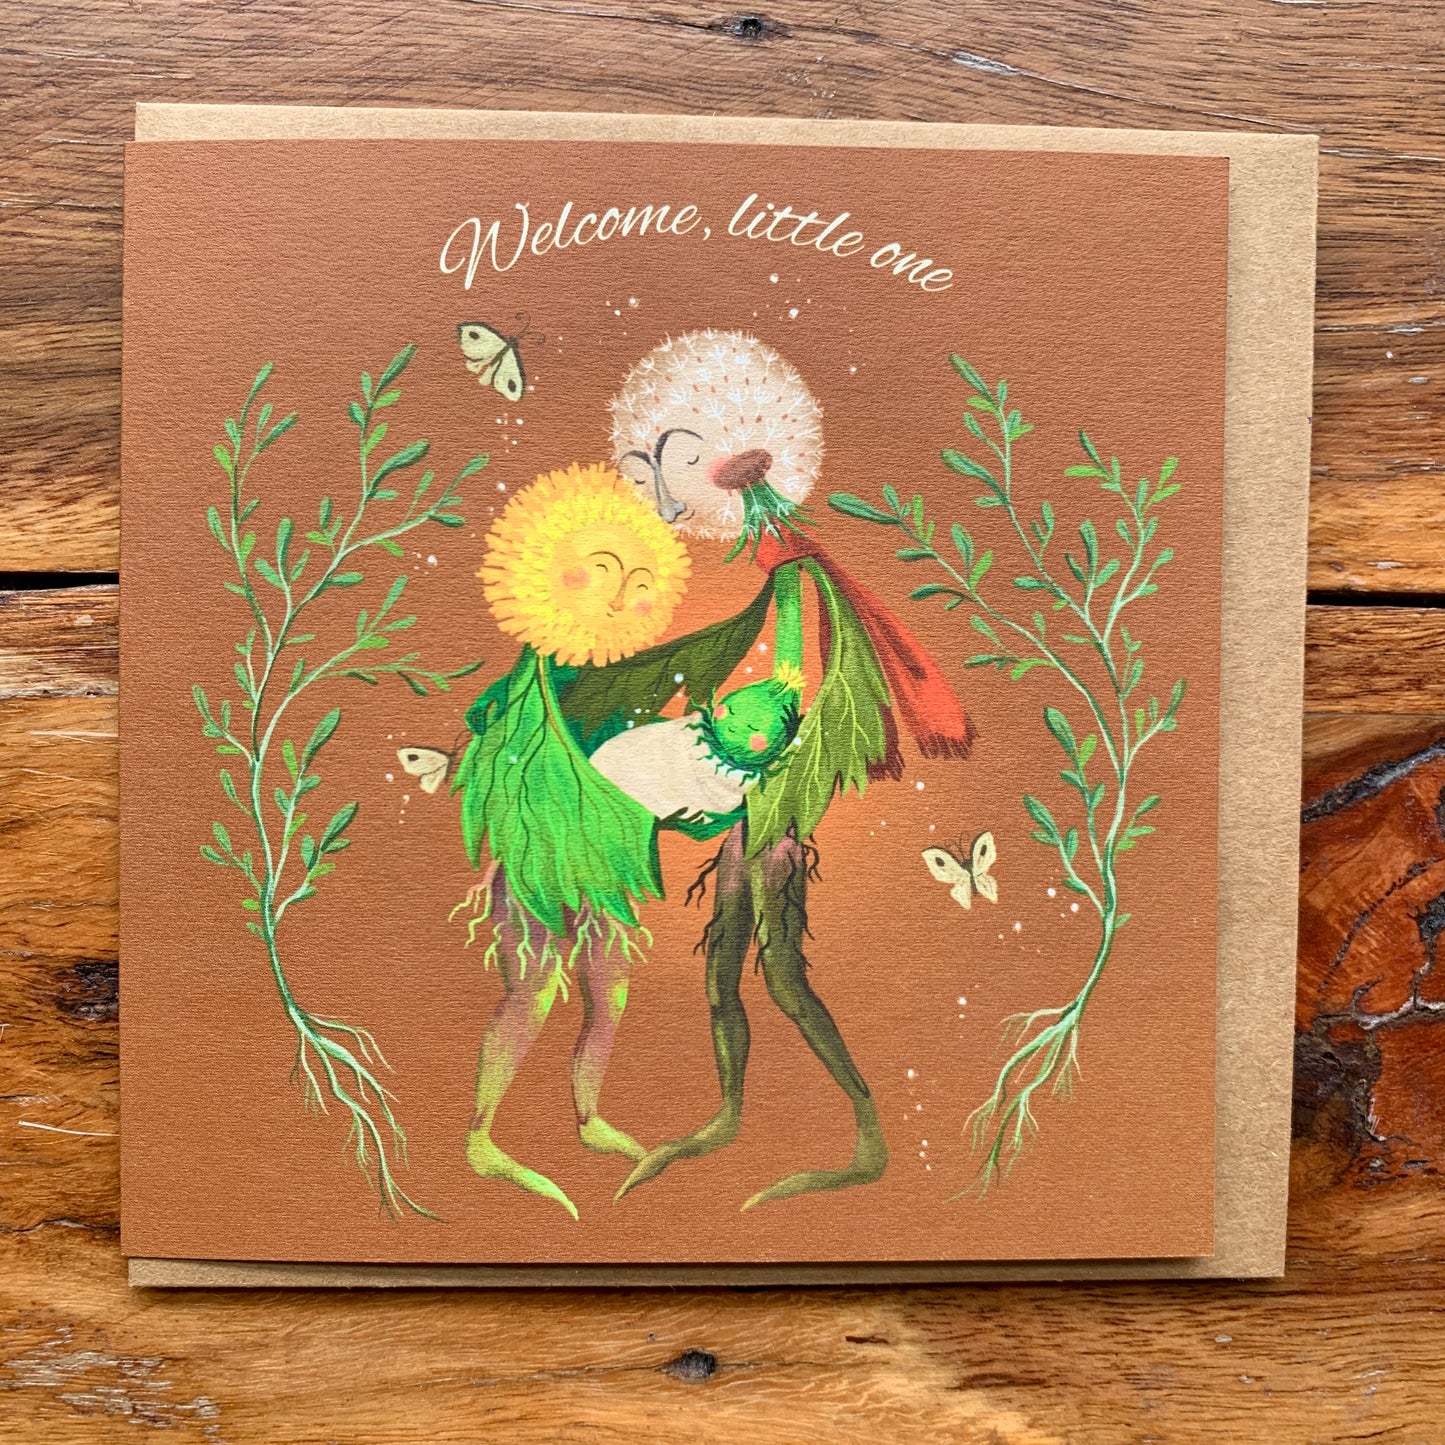 Anna Seed Art | Occasion Card - Welcome, little one. Cute flower illustration